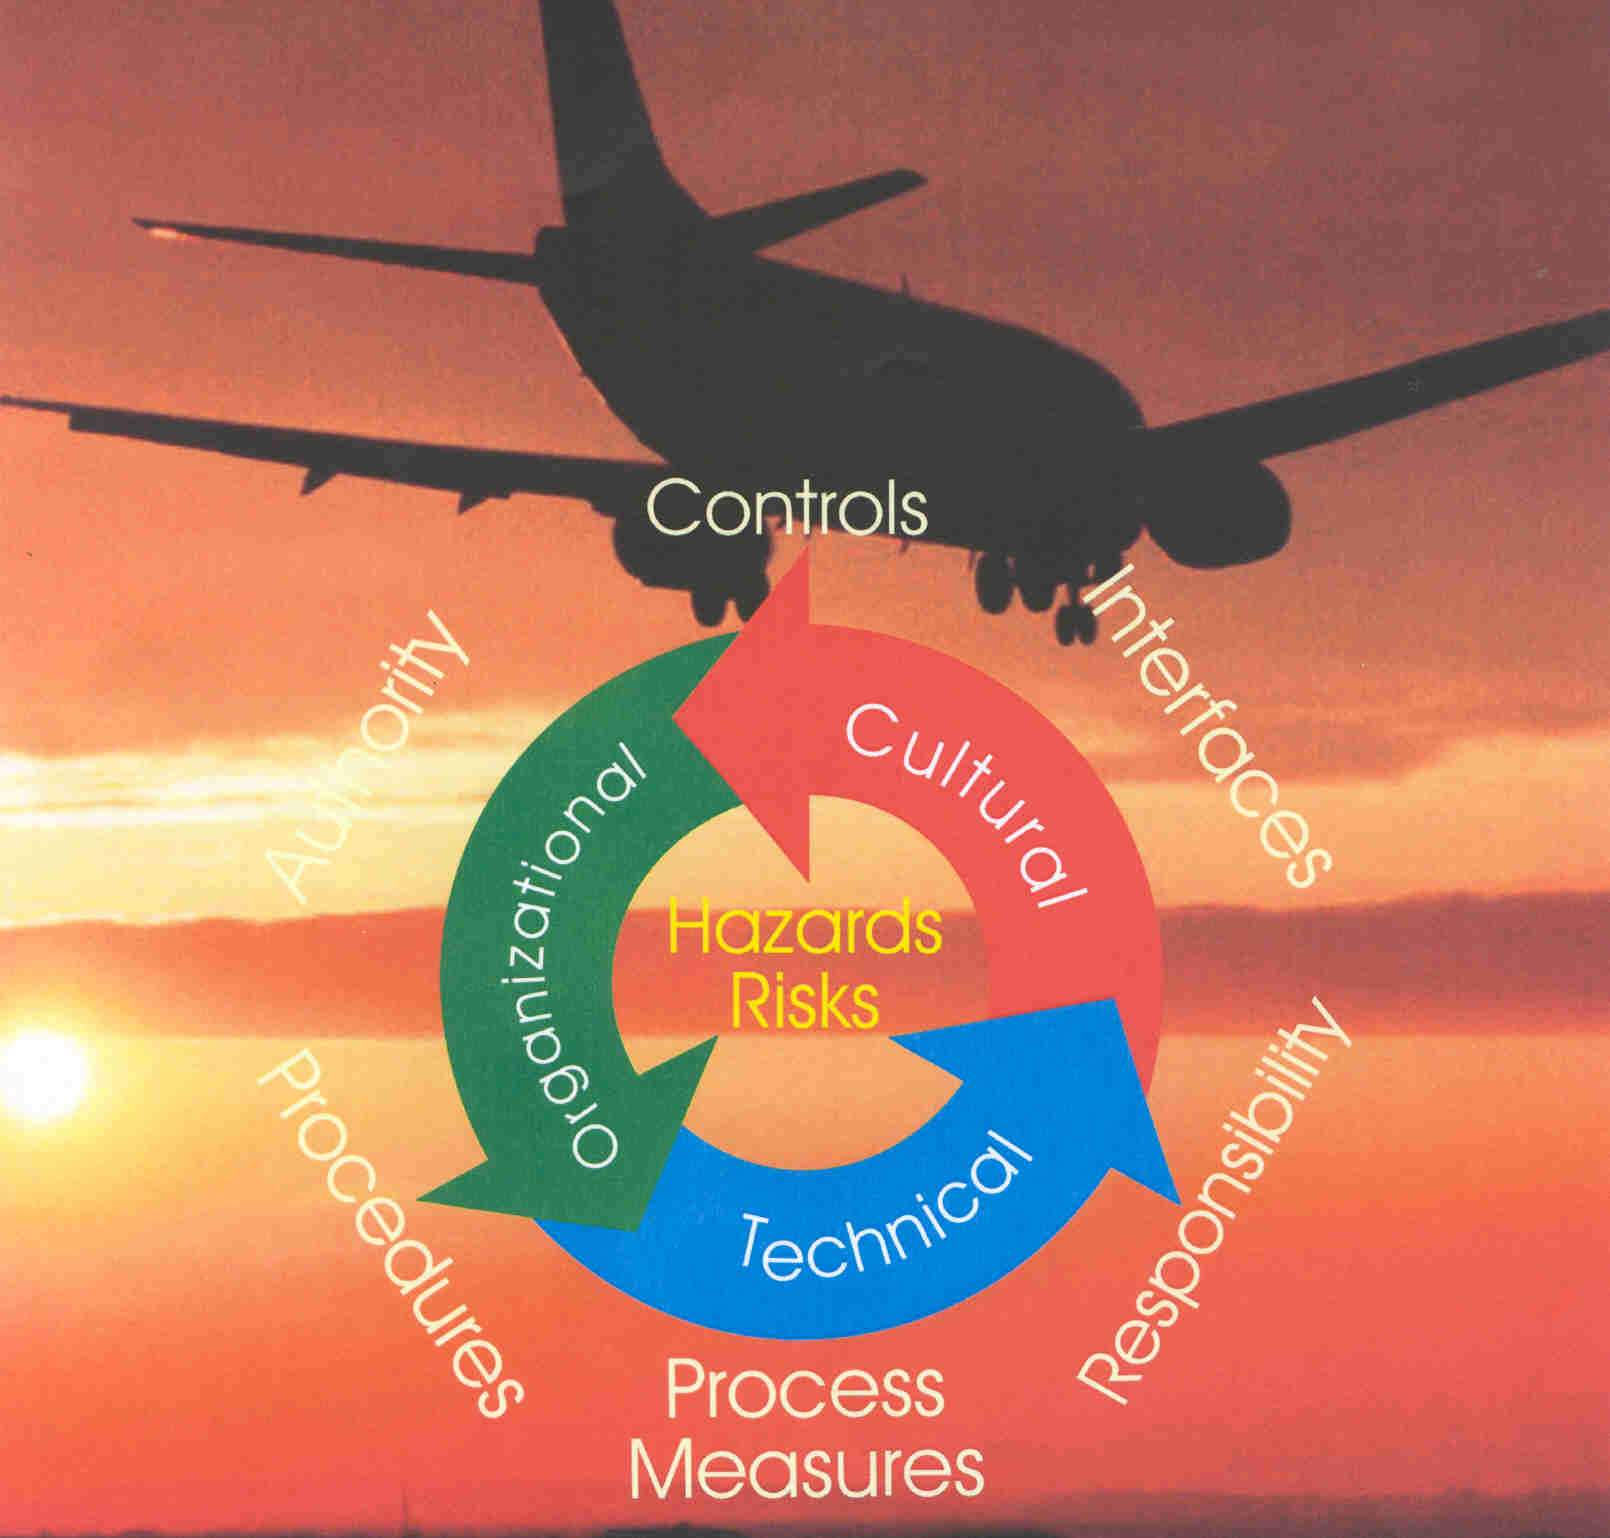 Picture of the FAA system safety componets